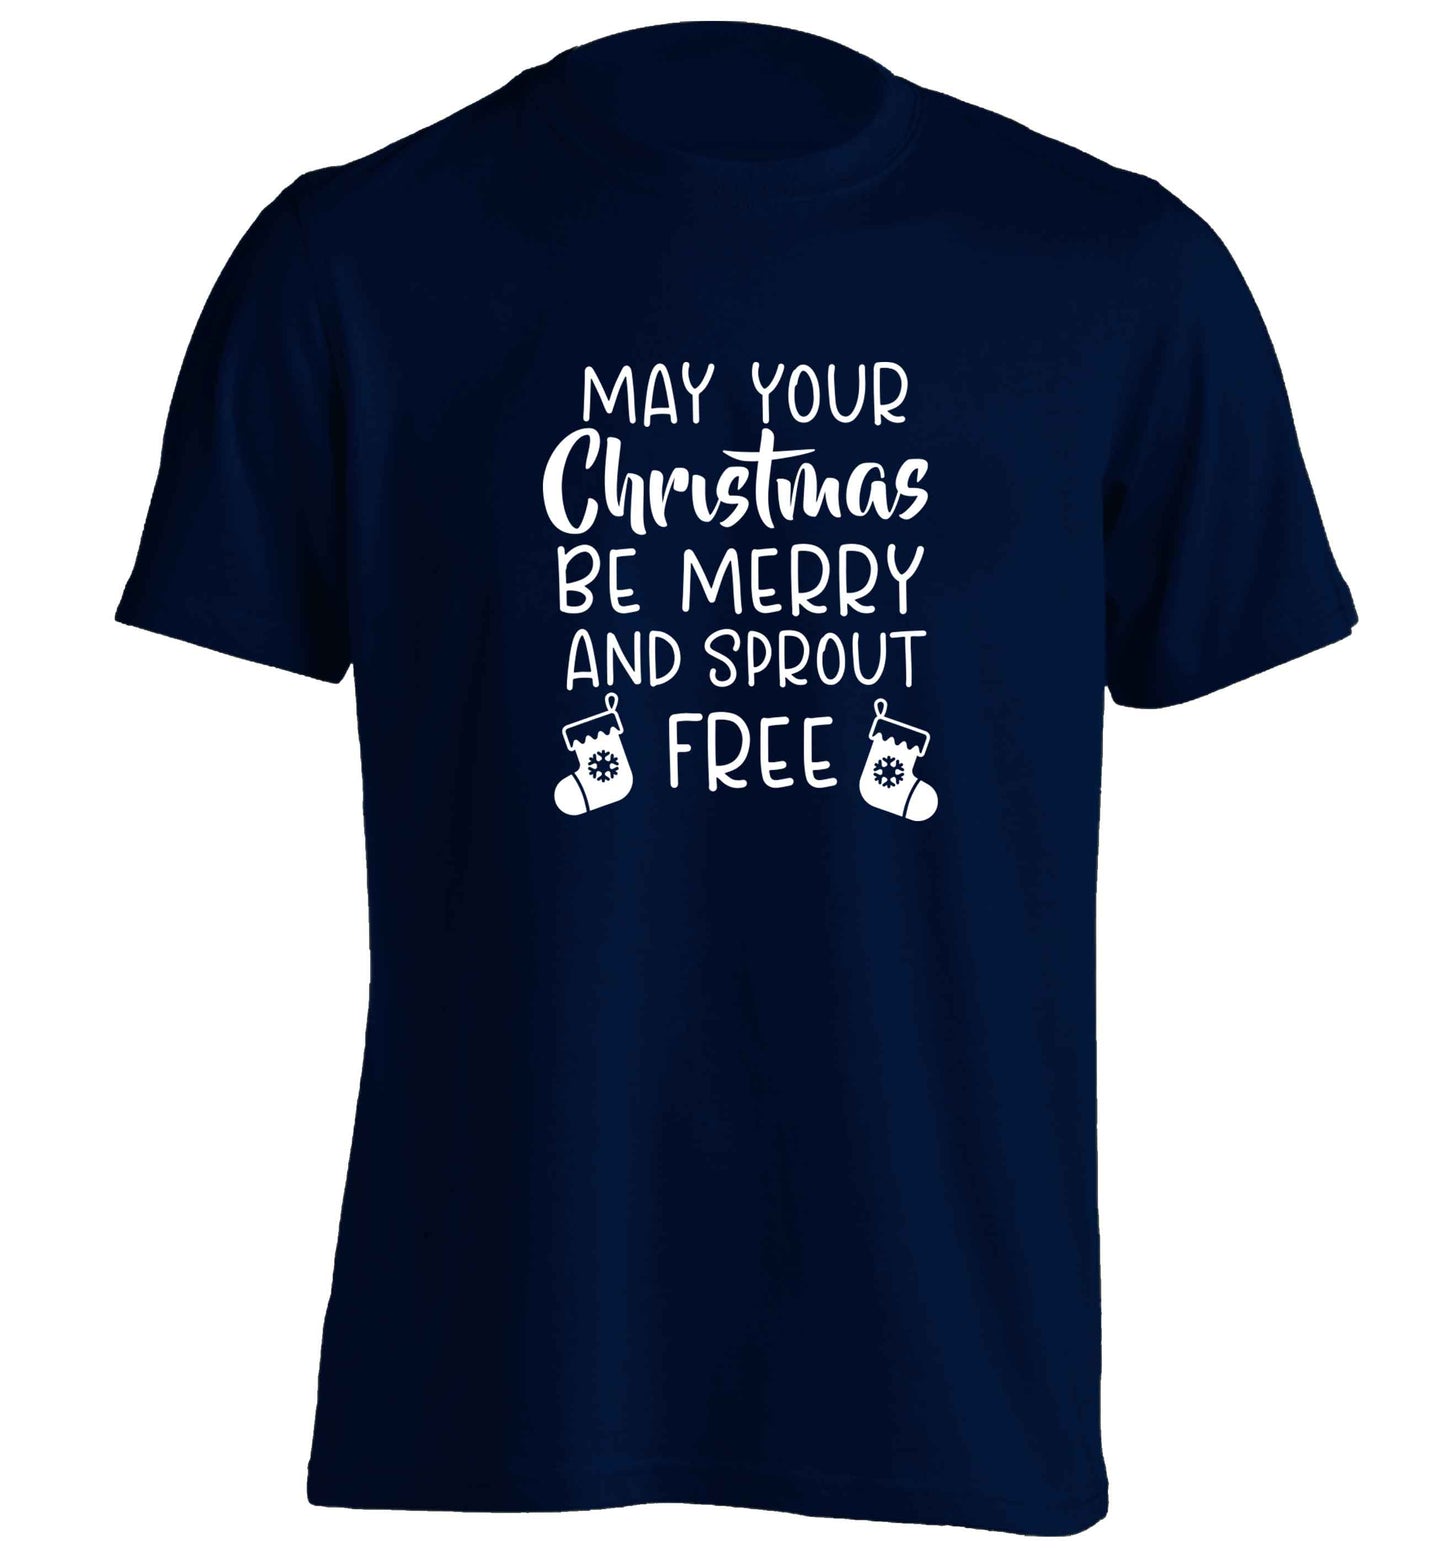 May your Christmas be merry and sprout free adults unisex navy Tshirt 2XL